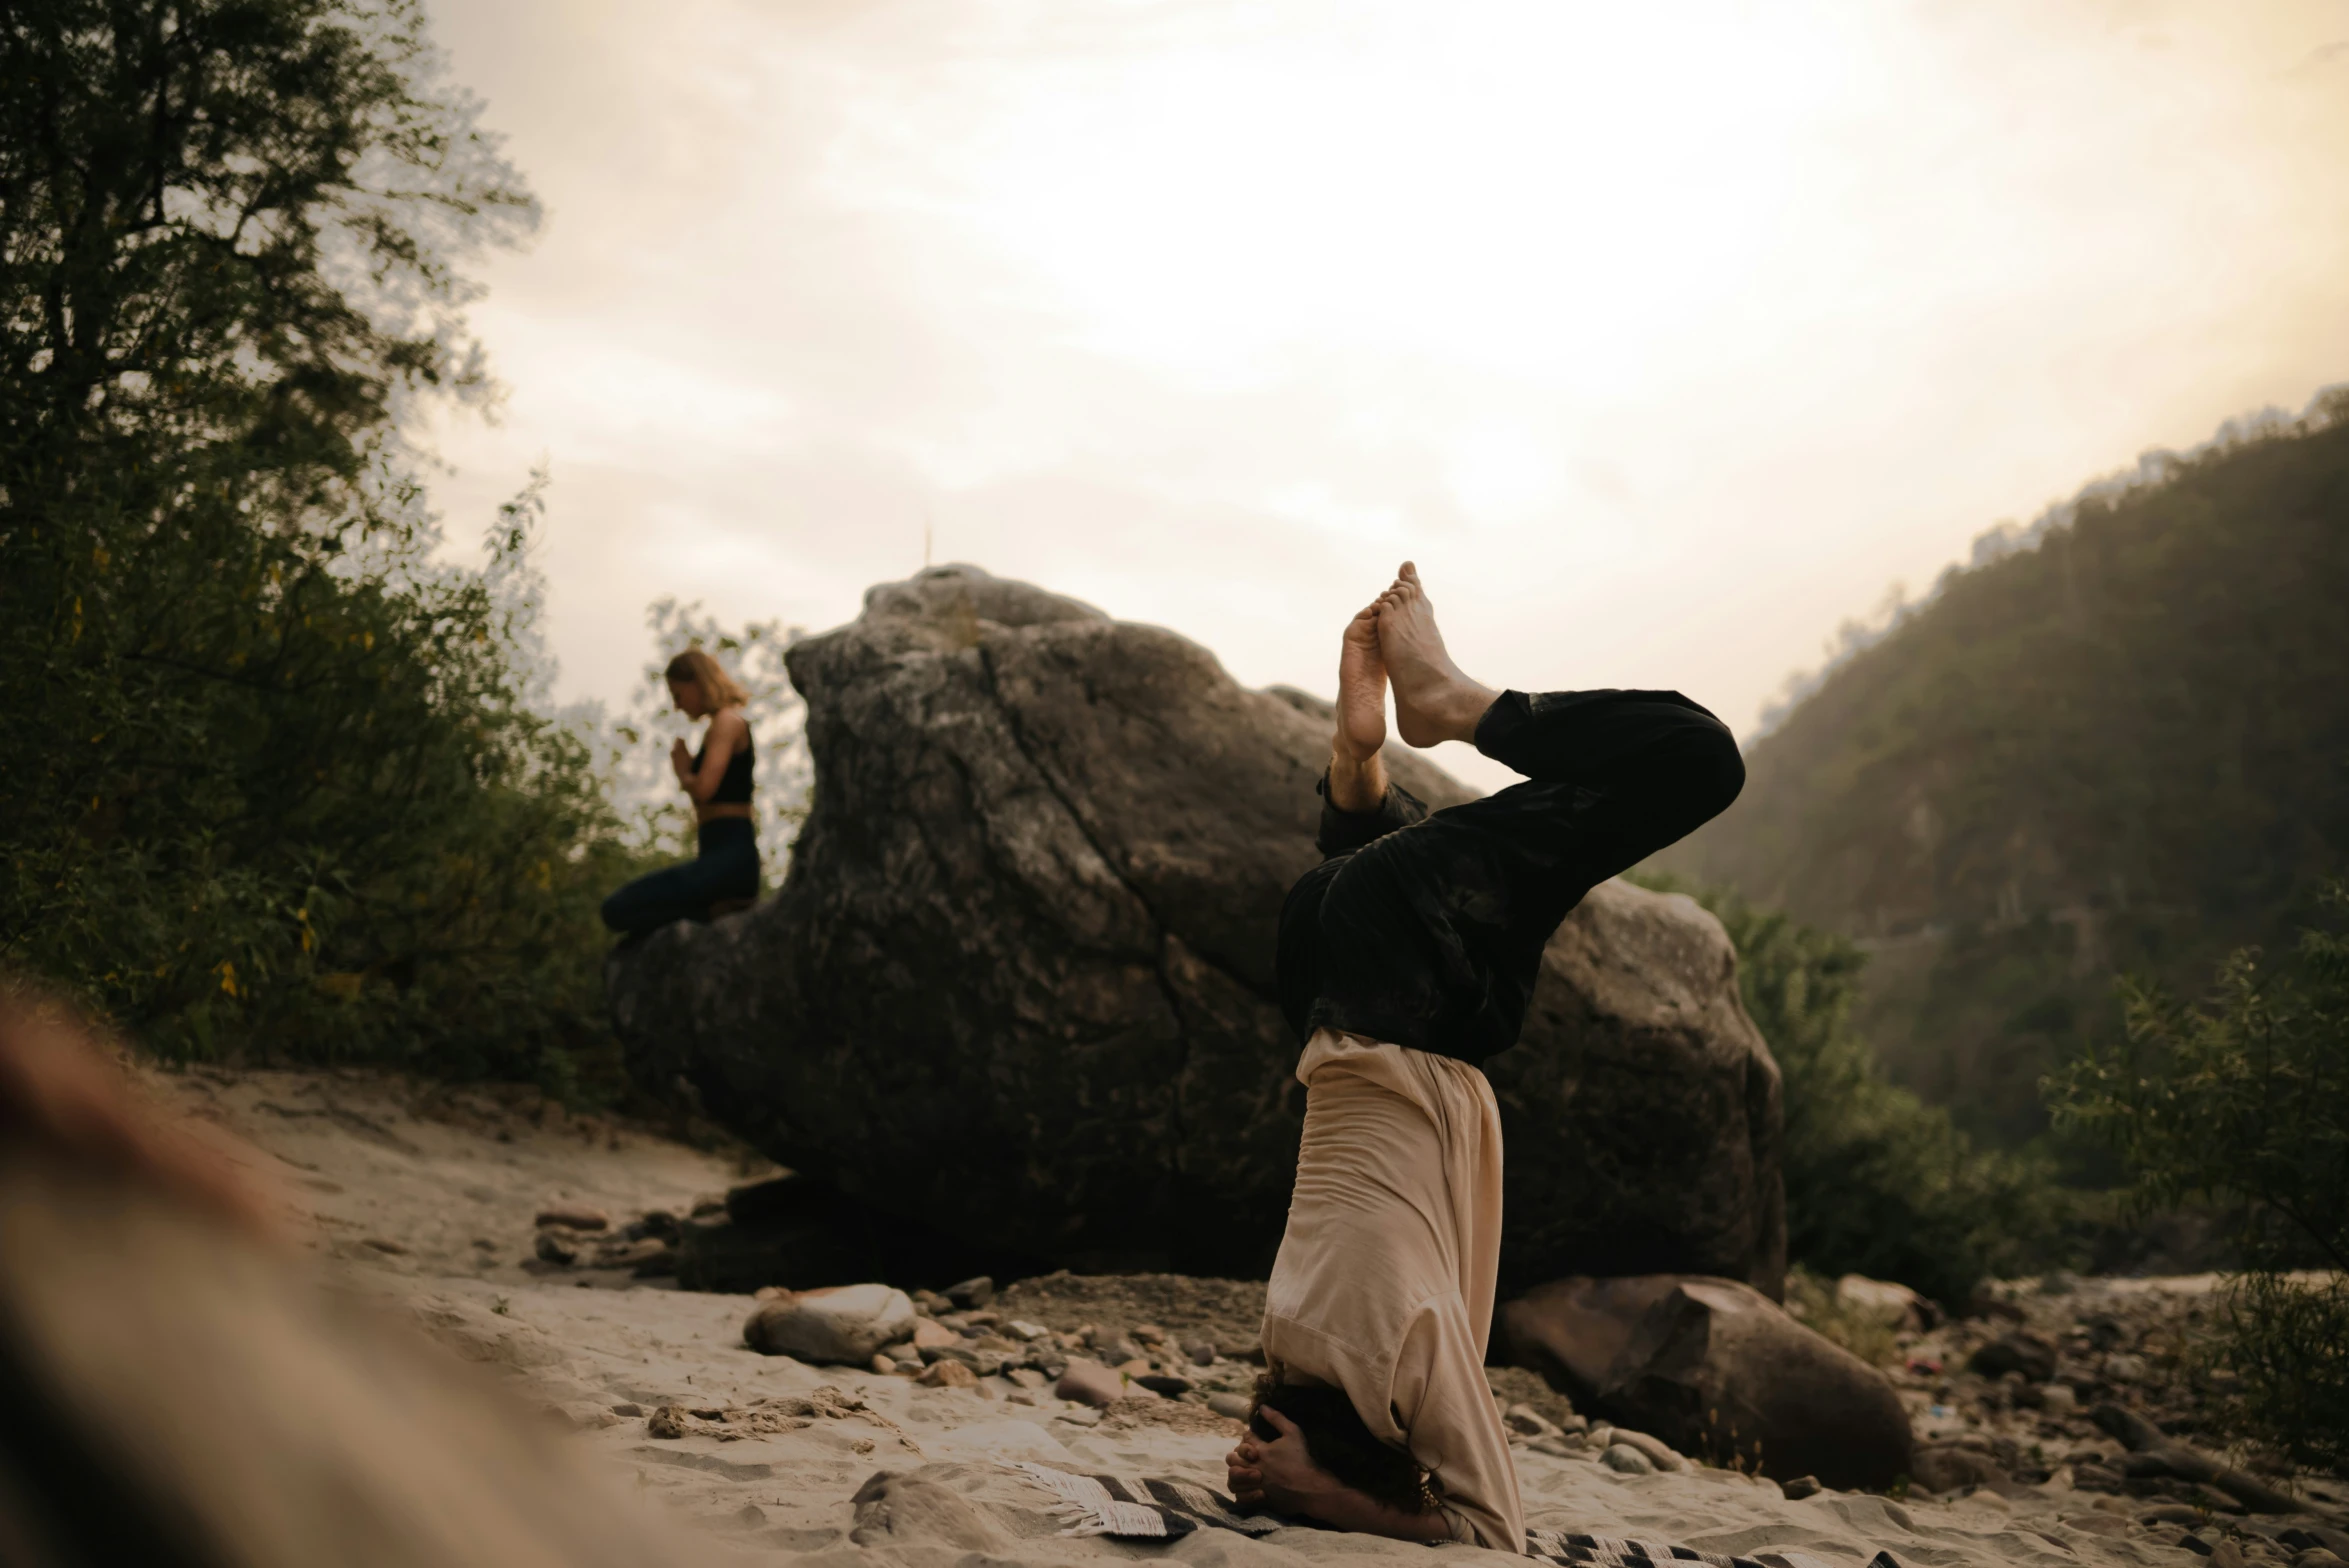 two women are doing yoga on rocks with trees and clouds